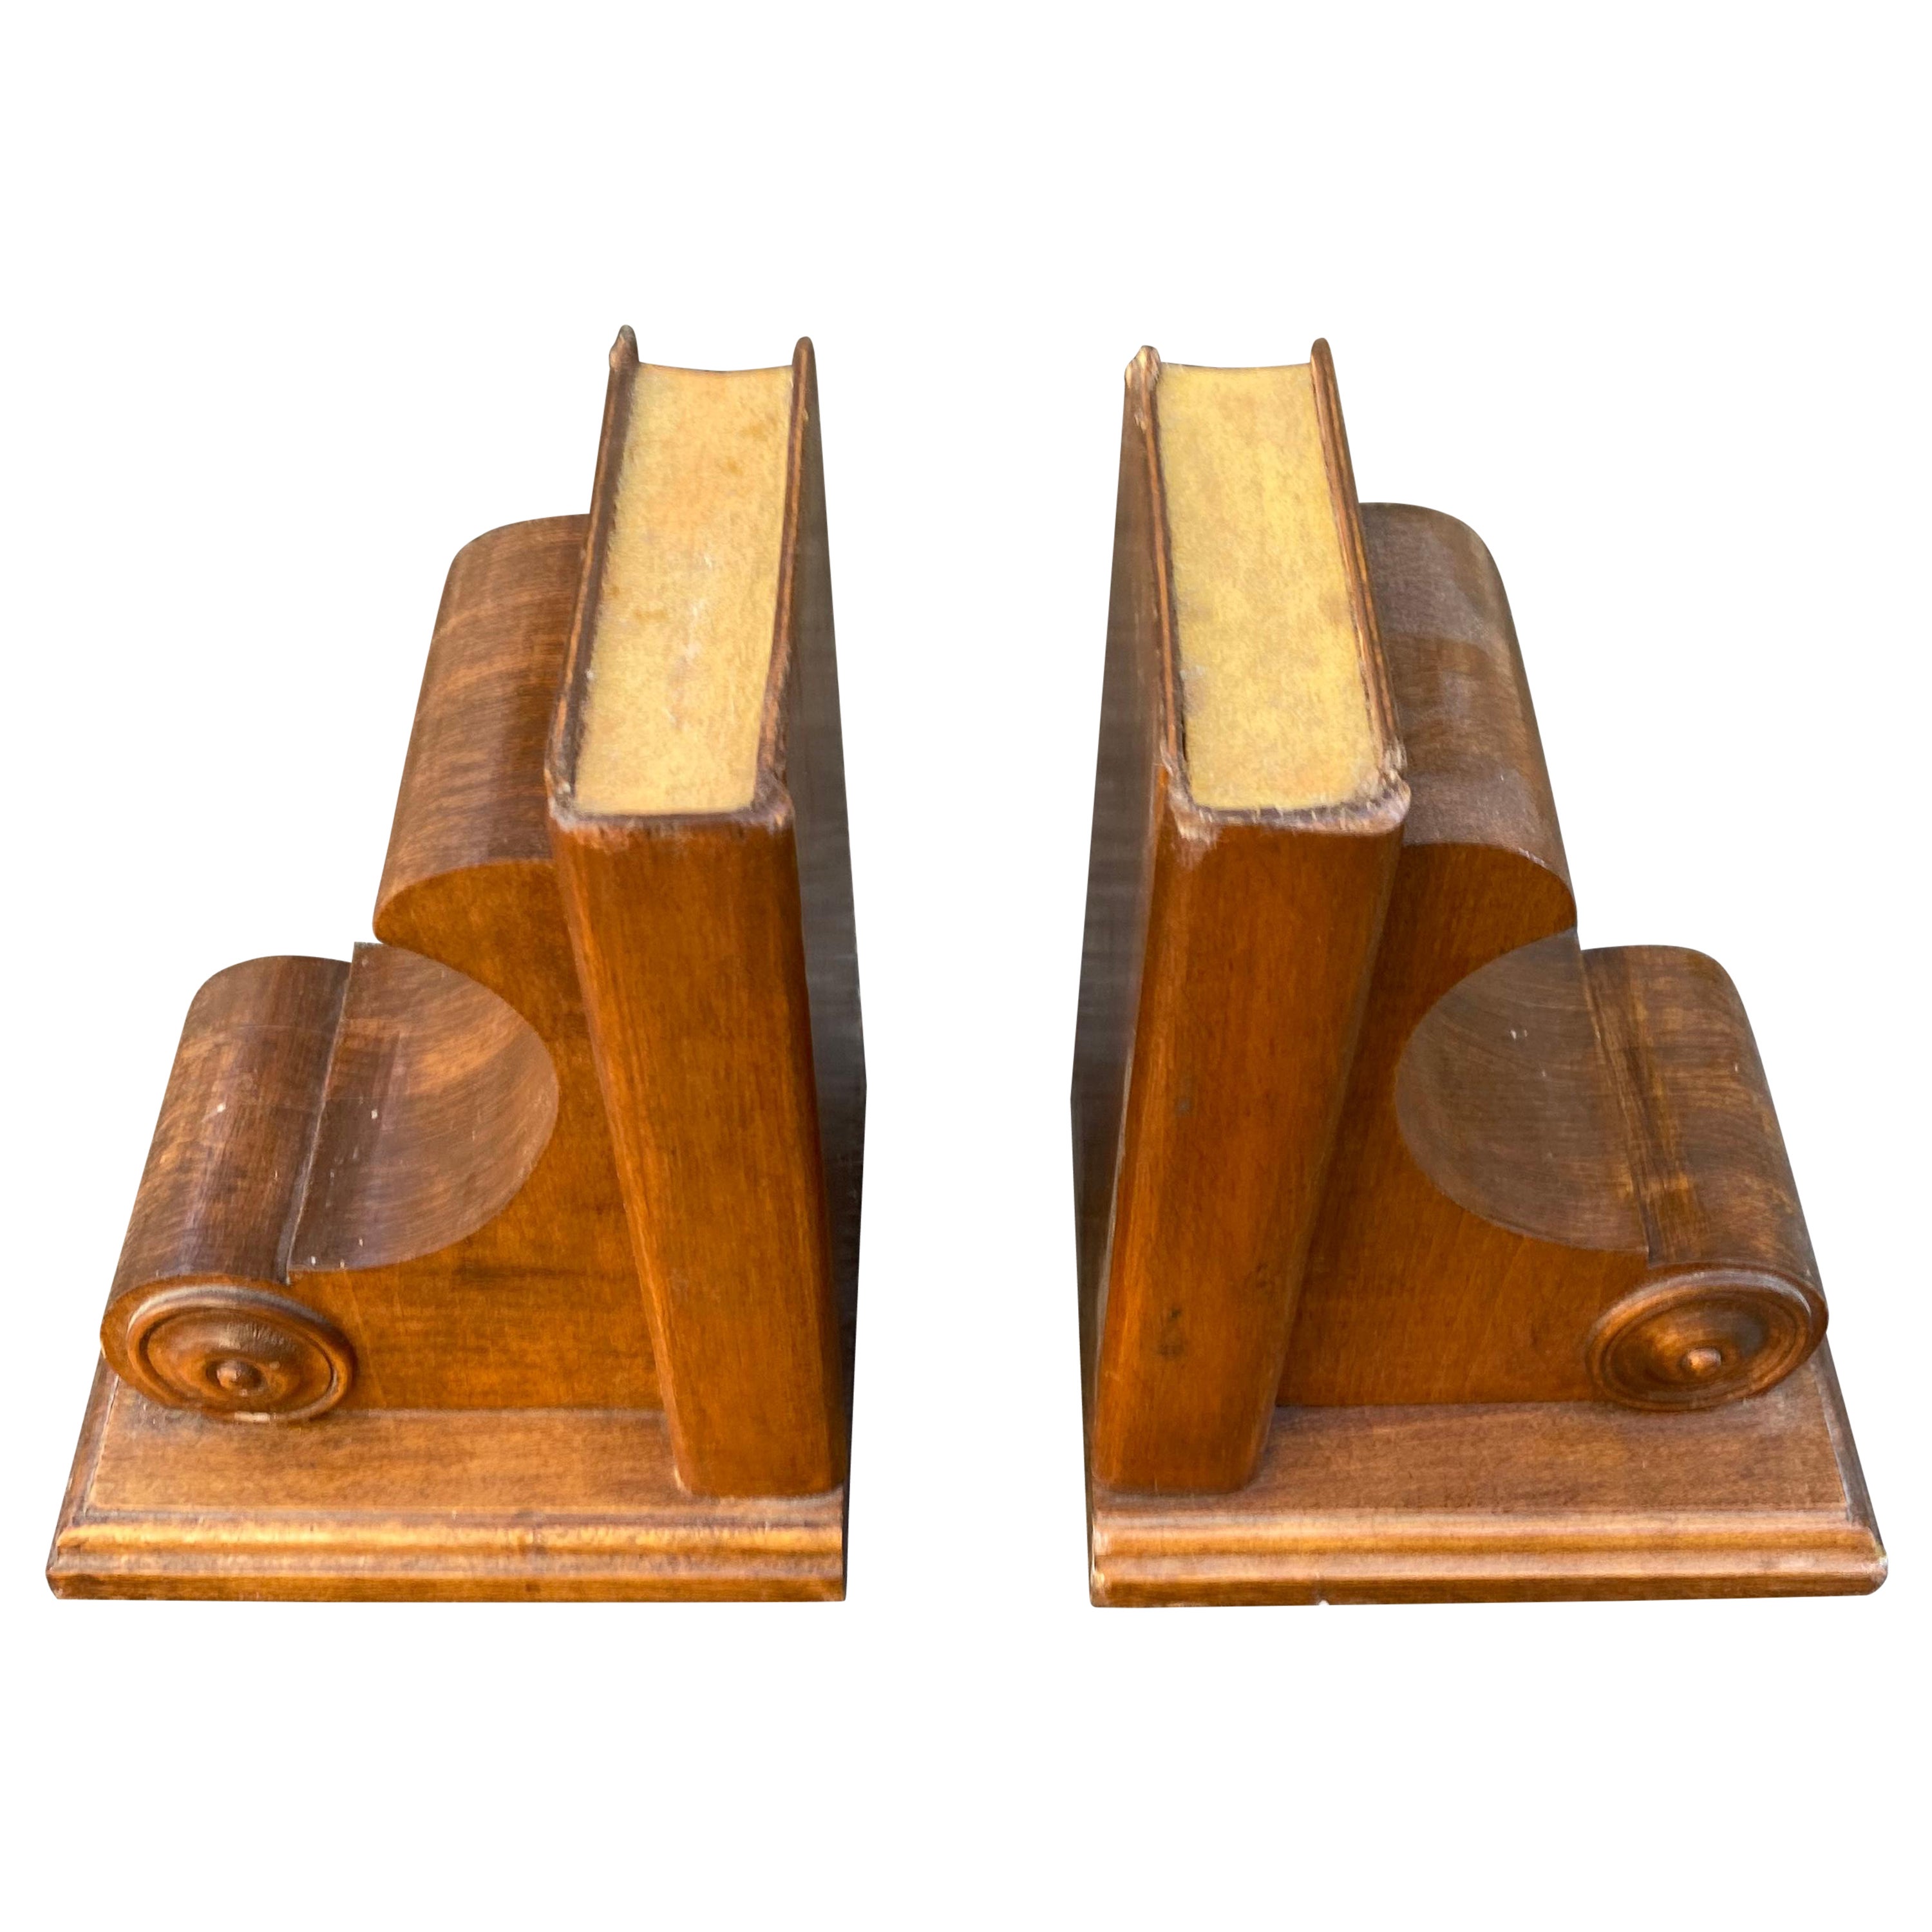 Antique Bookends with Academic Motif